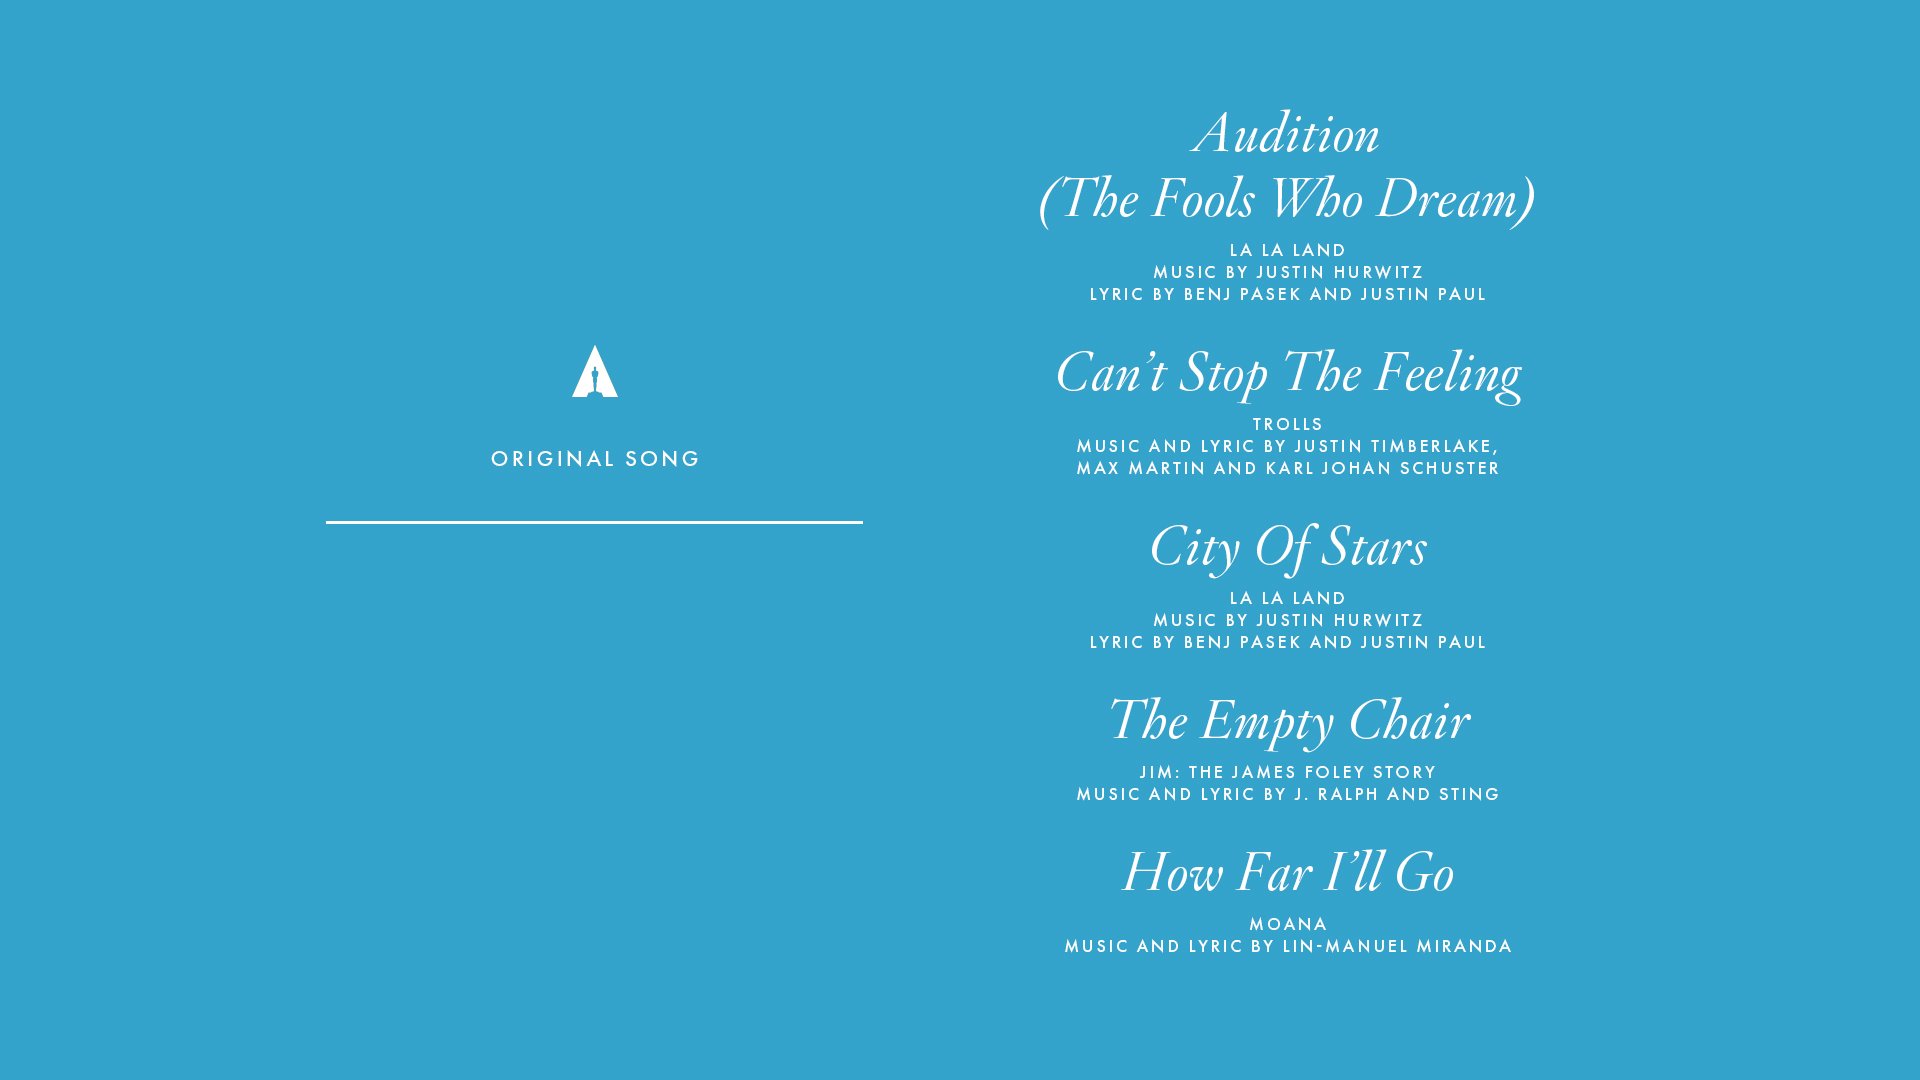 The Academy on X: ICYMI: Congratulations to the Best Picture nominees!  #OscarNoms  / X